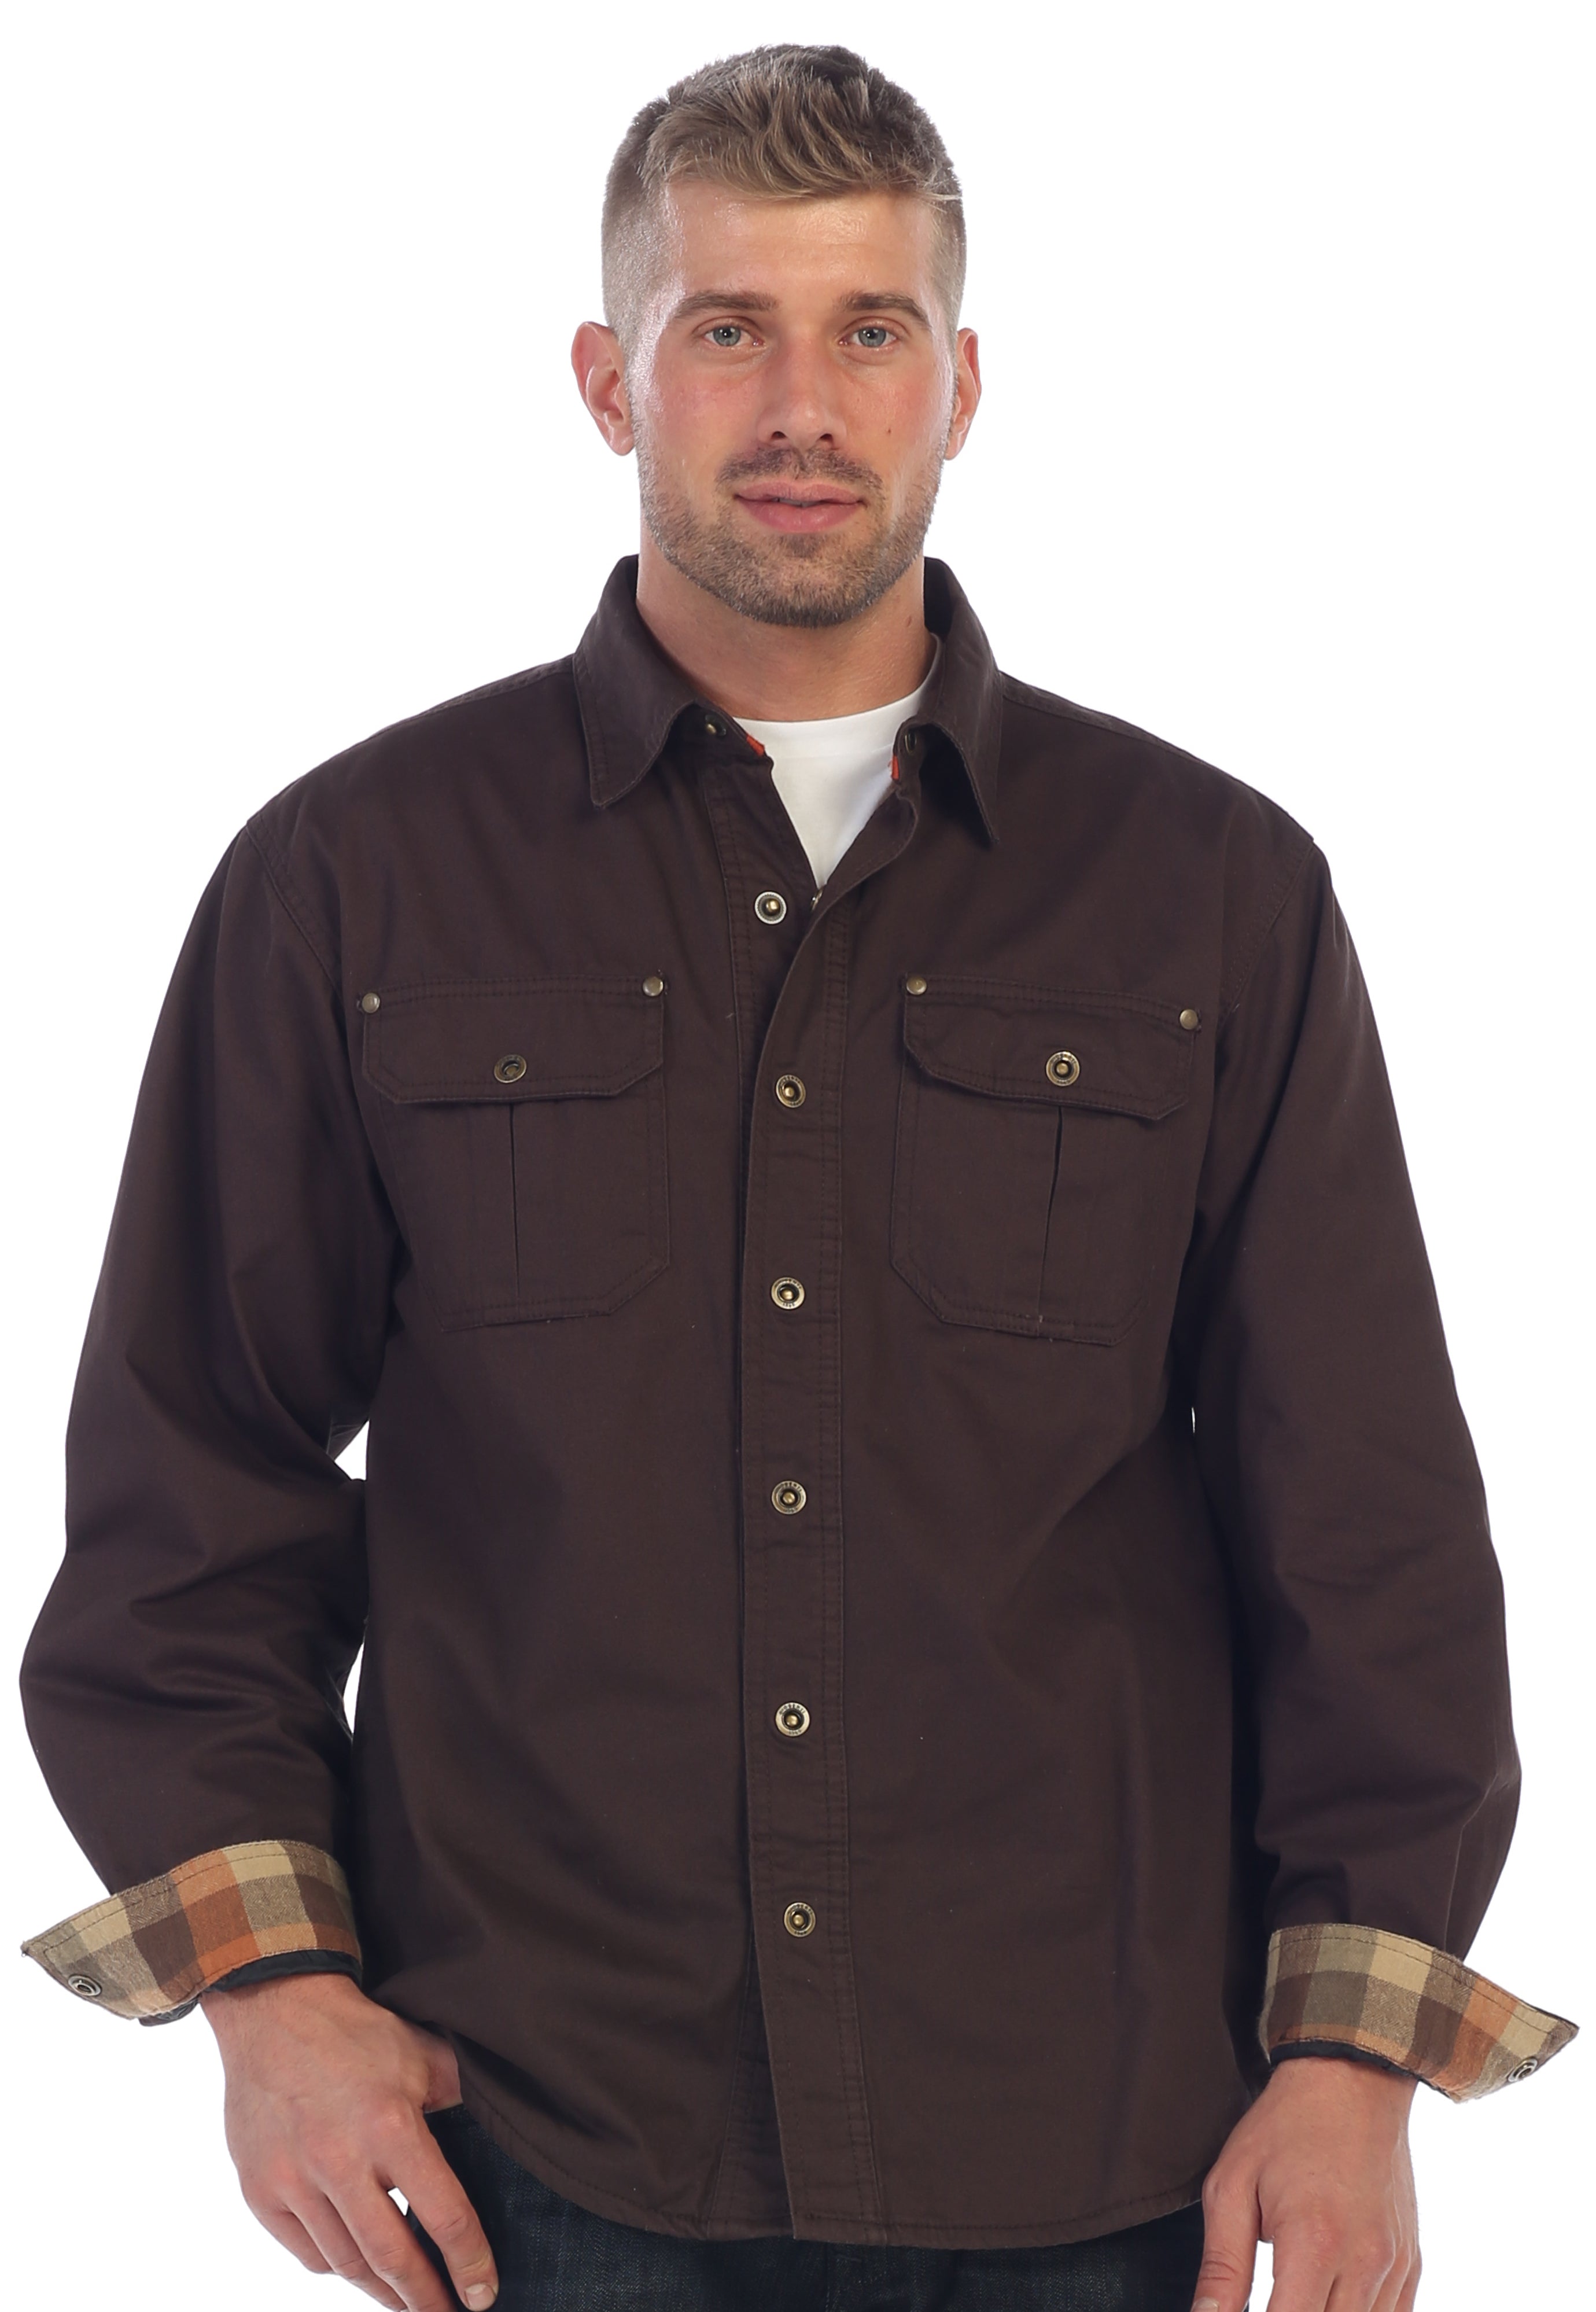 title:Gioberti Men's Brown Cotton Brushed and Soft Twill Shirt Jacket with Flannel Lining;color:Brown